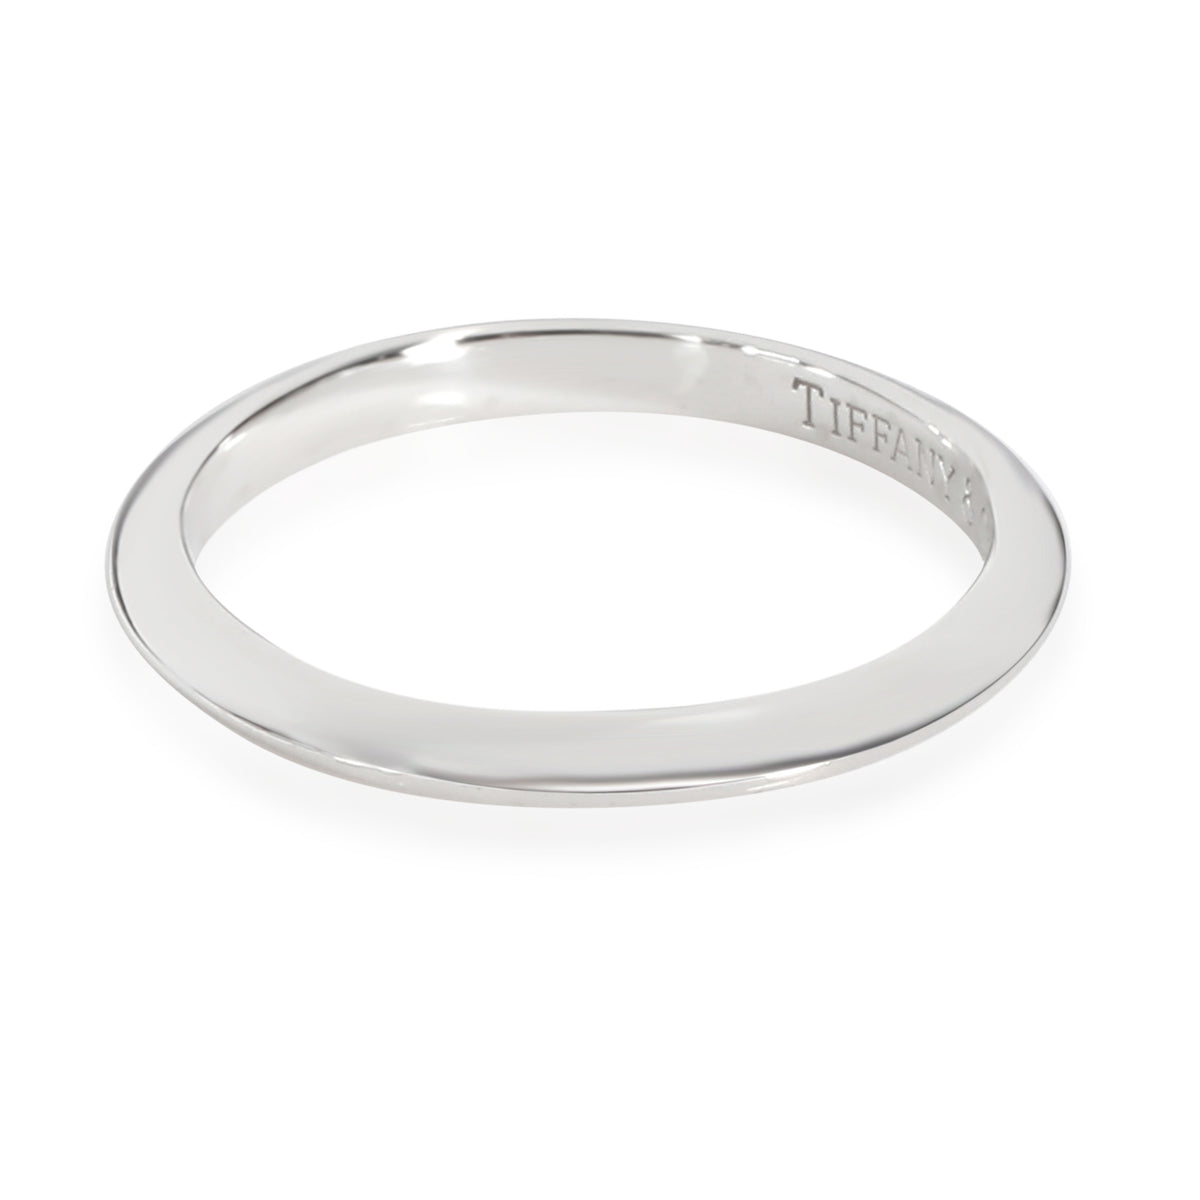 Tiffany & Co. Knife Edge Band in Platinum 2mm